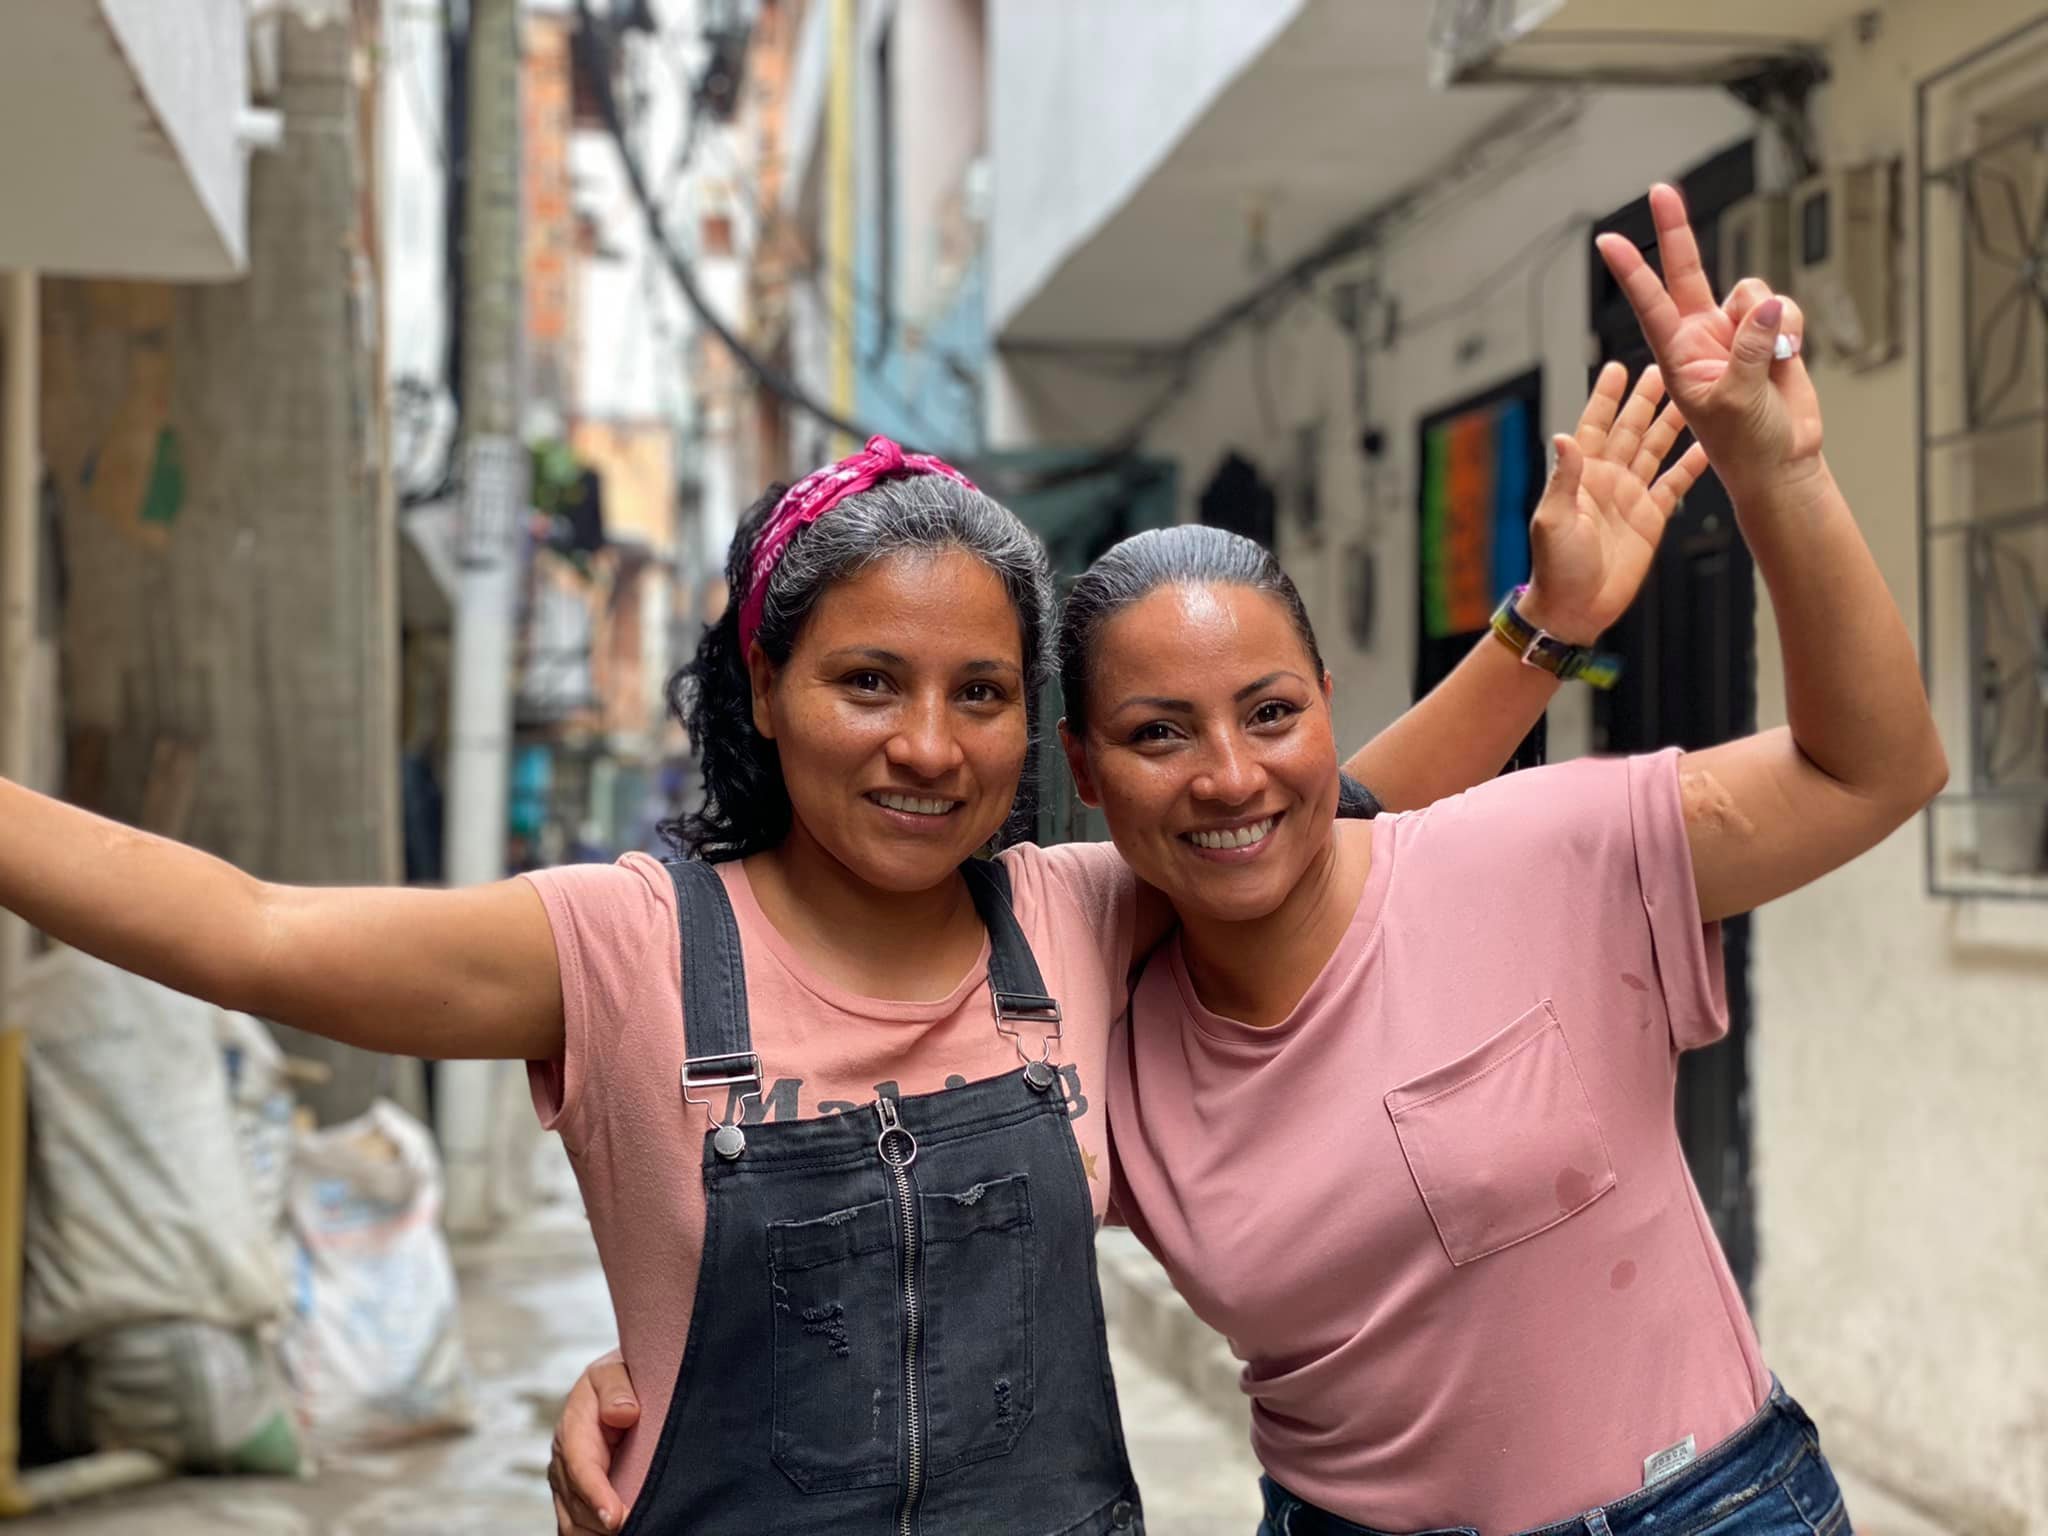  Angela Holguin (right) and her twin sister Cielo drive several social initiatives in their barrio, including the funding and building of a community center as well as bringing in visitors to introduce travelers to the issues and potential in the com